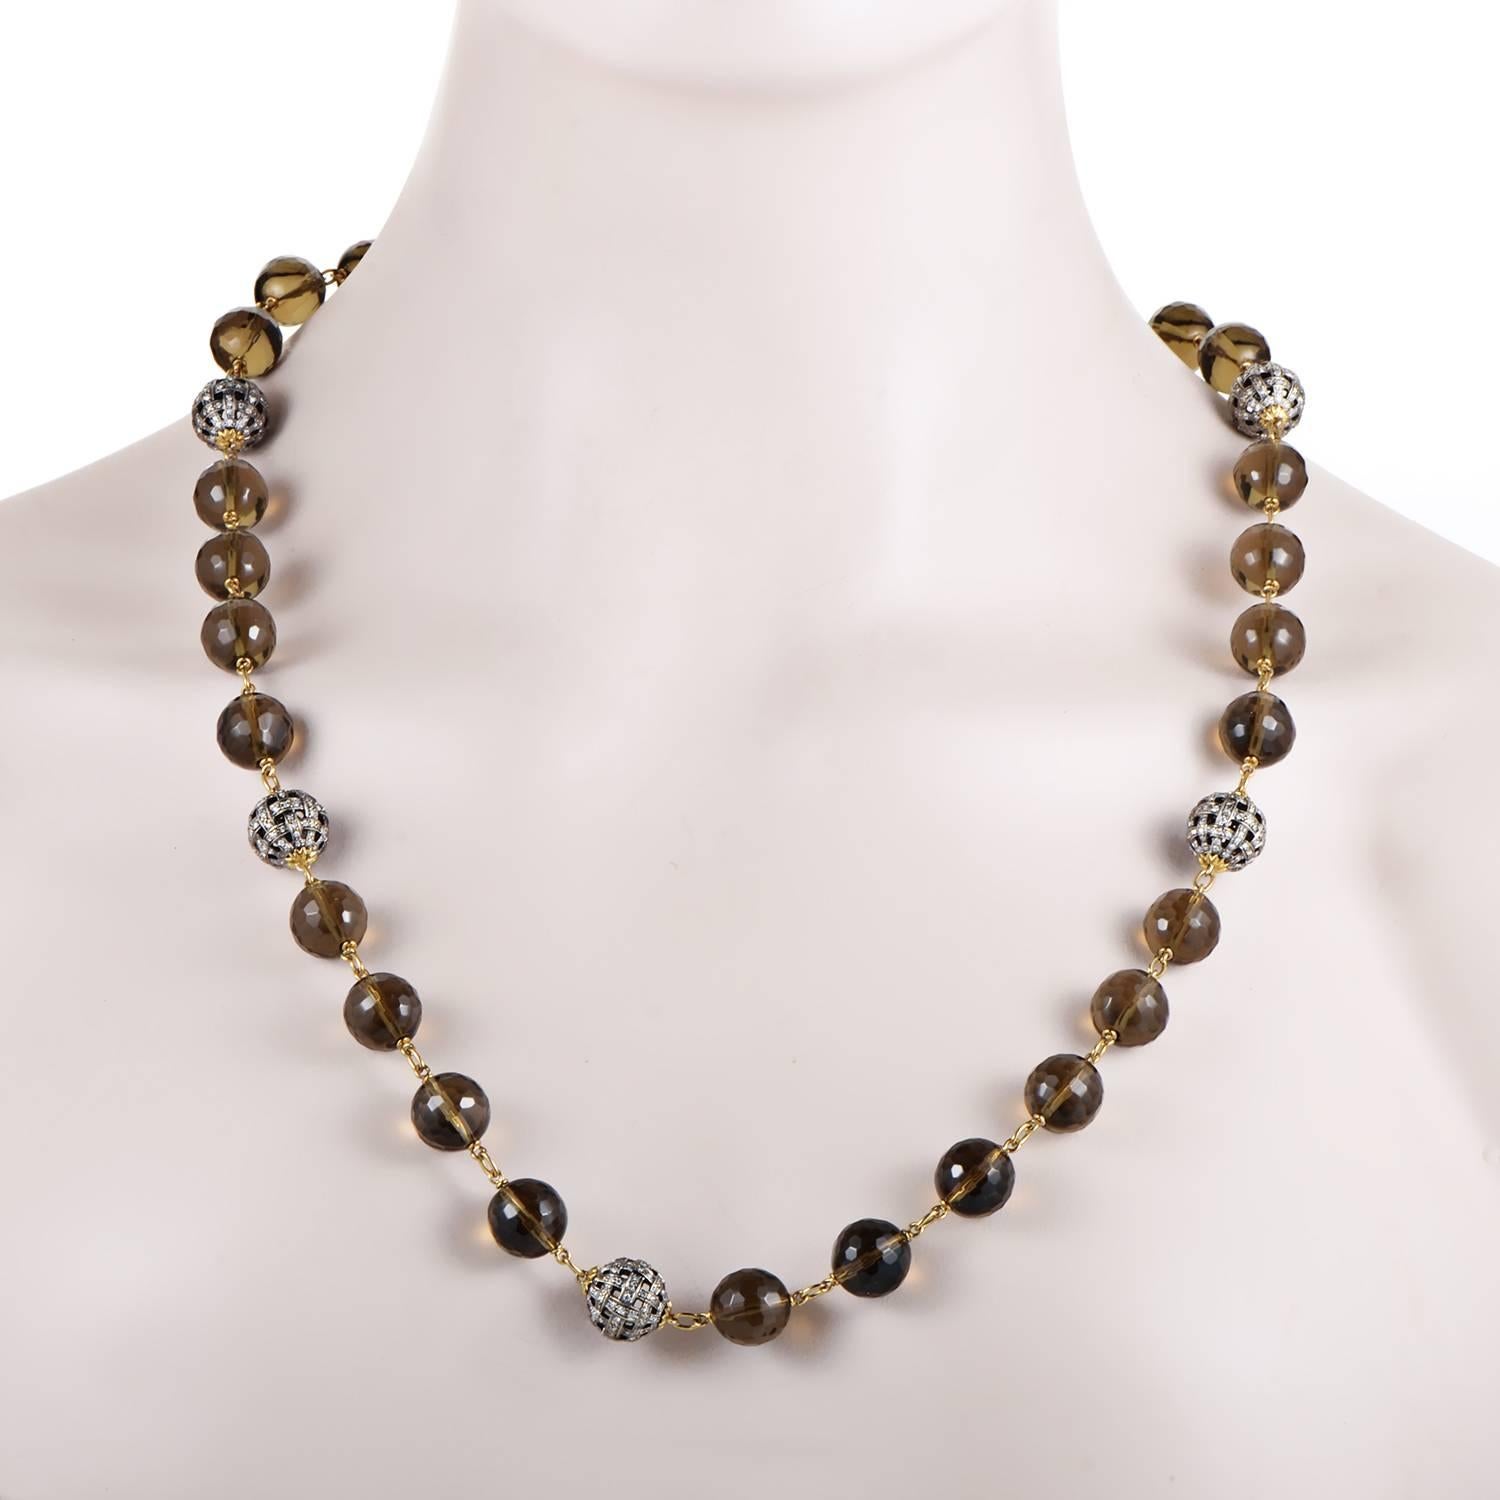 The subtle chain made of radiant 18K yellow gold is lined with gorgeous spherical smoky topaz stones as well as enchanting round charms embellished with a total of 5.00 carats of sparkling diamonds in this astonishing necklace.